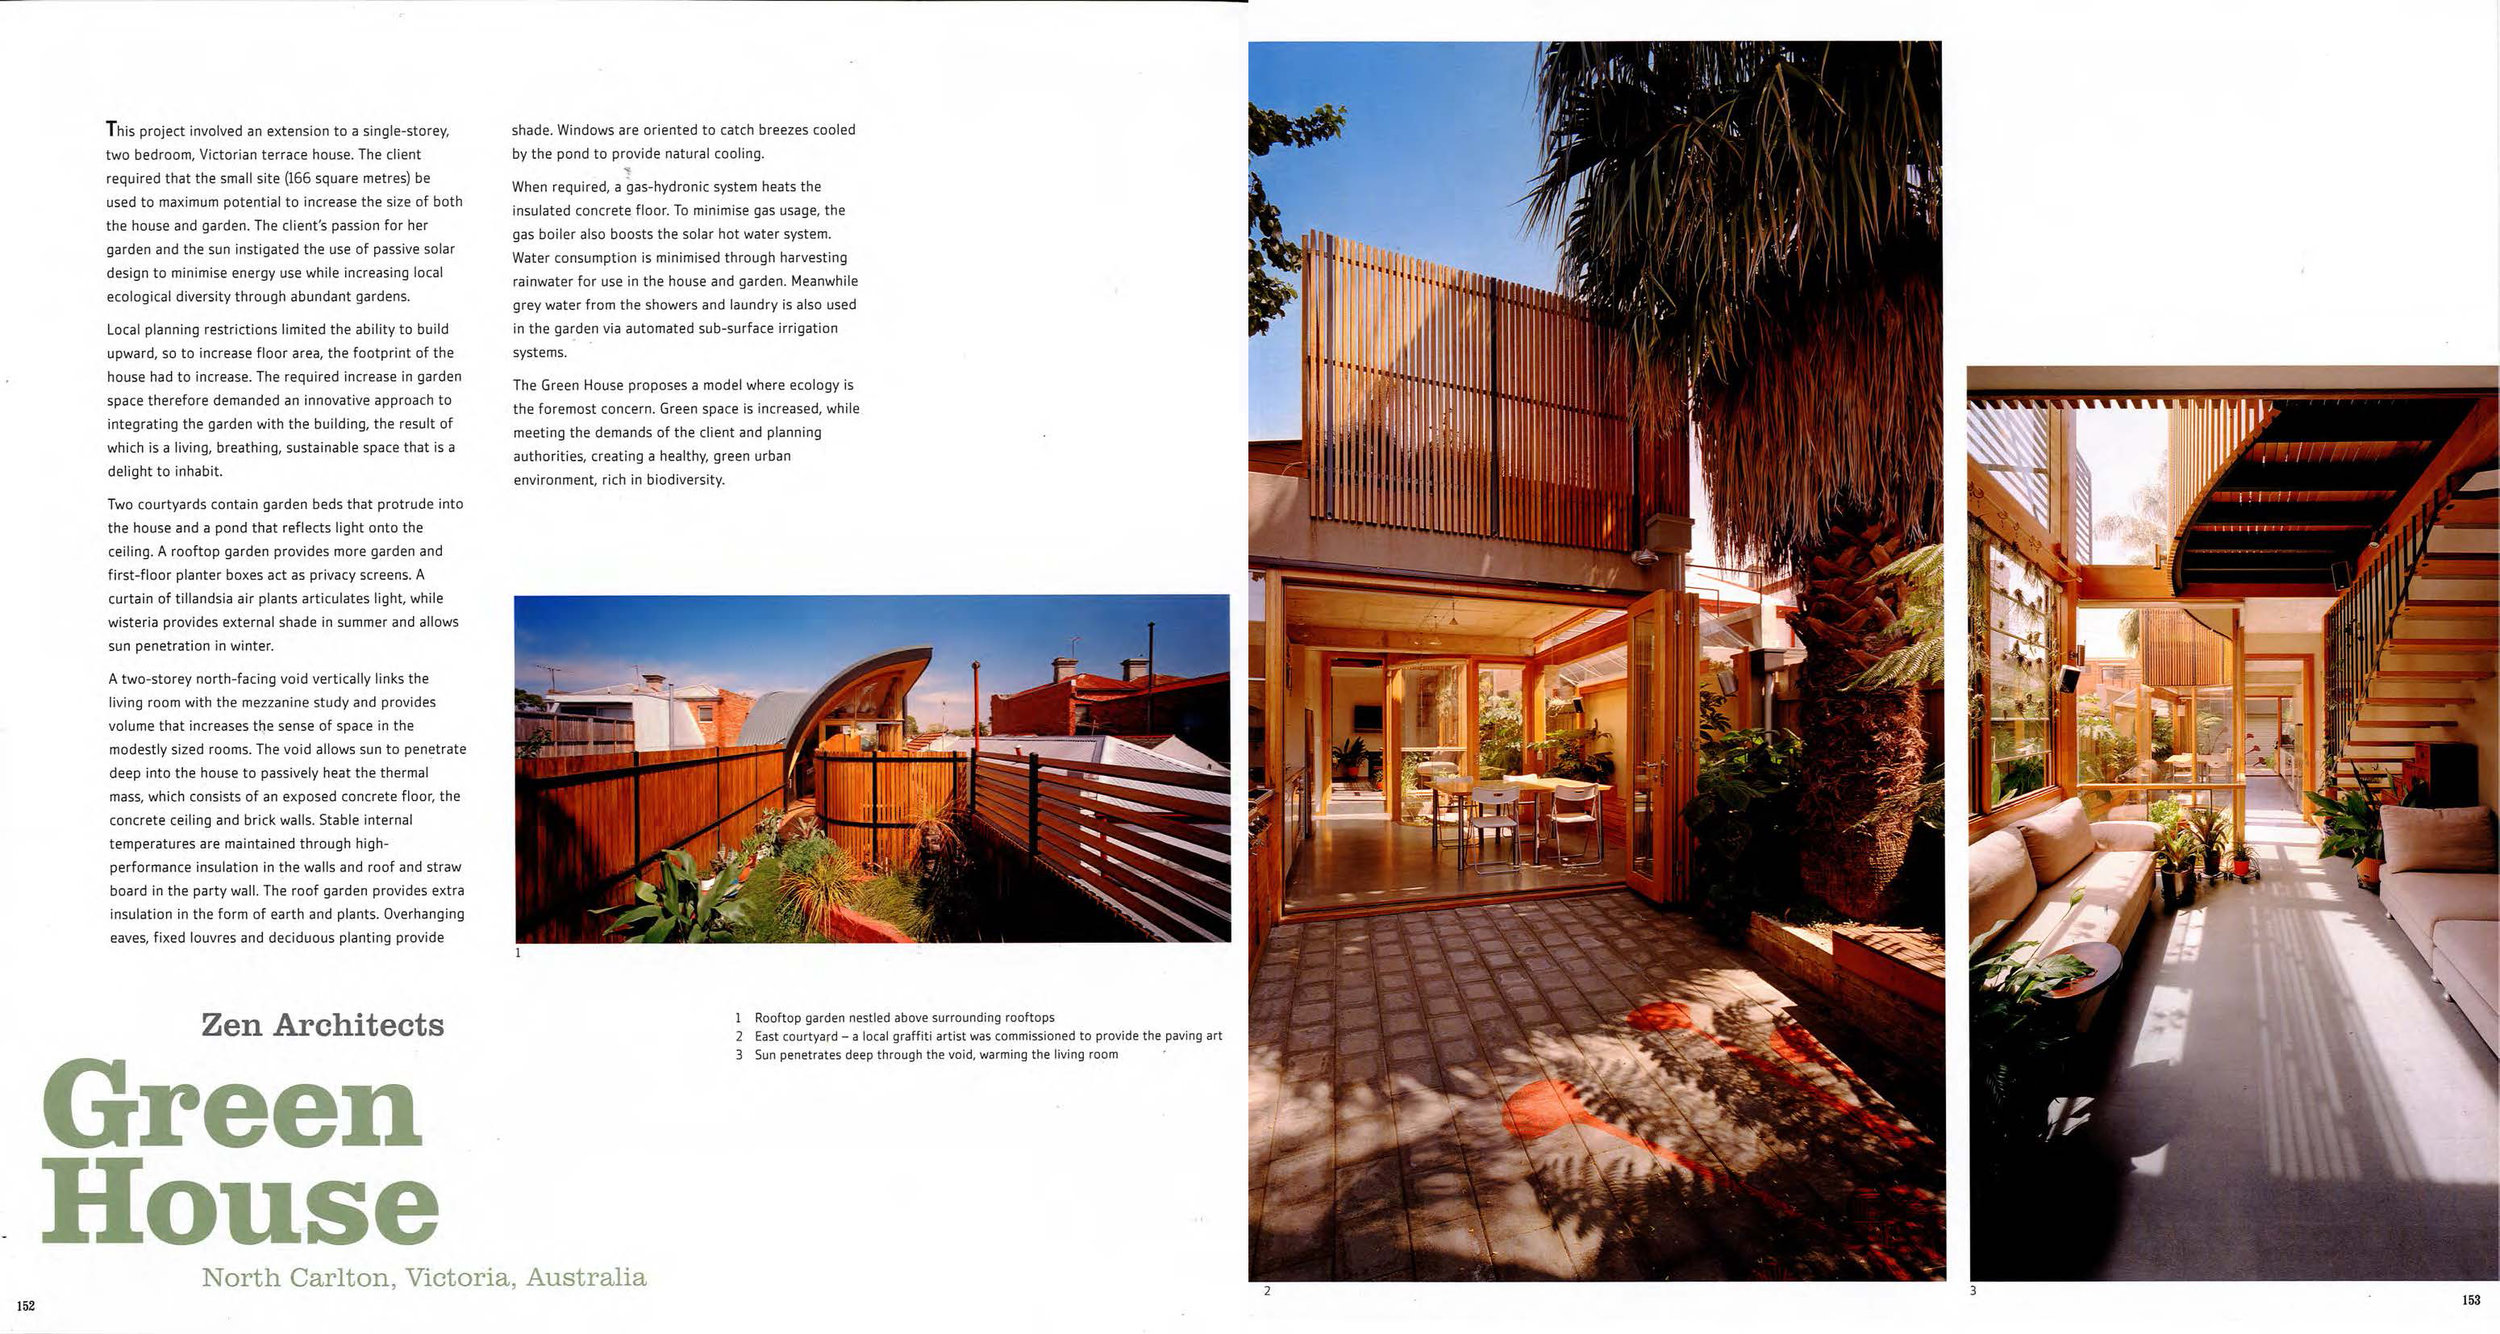 2008_100 Dream Houses from Down Under_Green House___Page_1-2.jpg